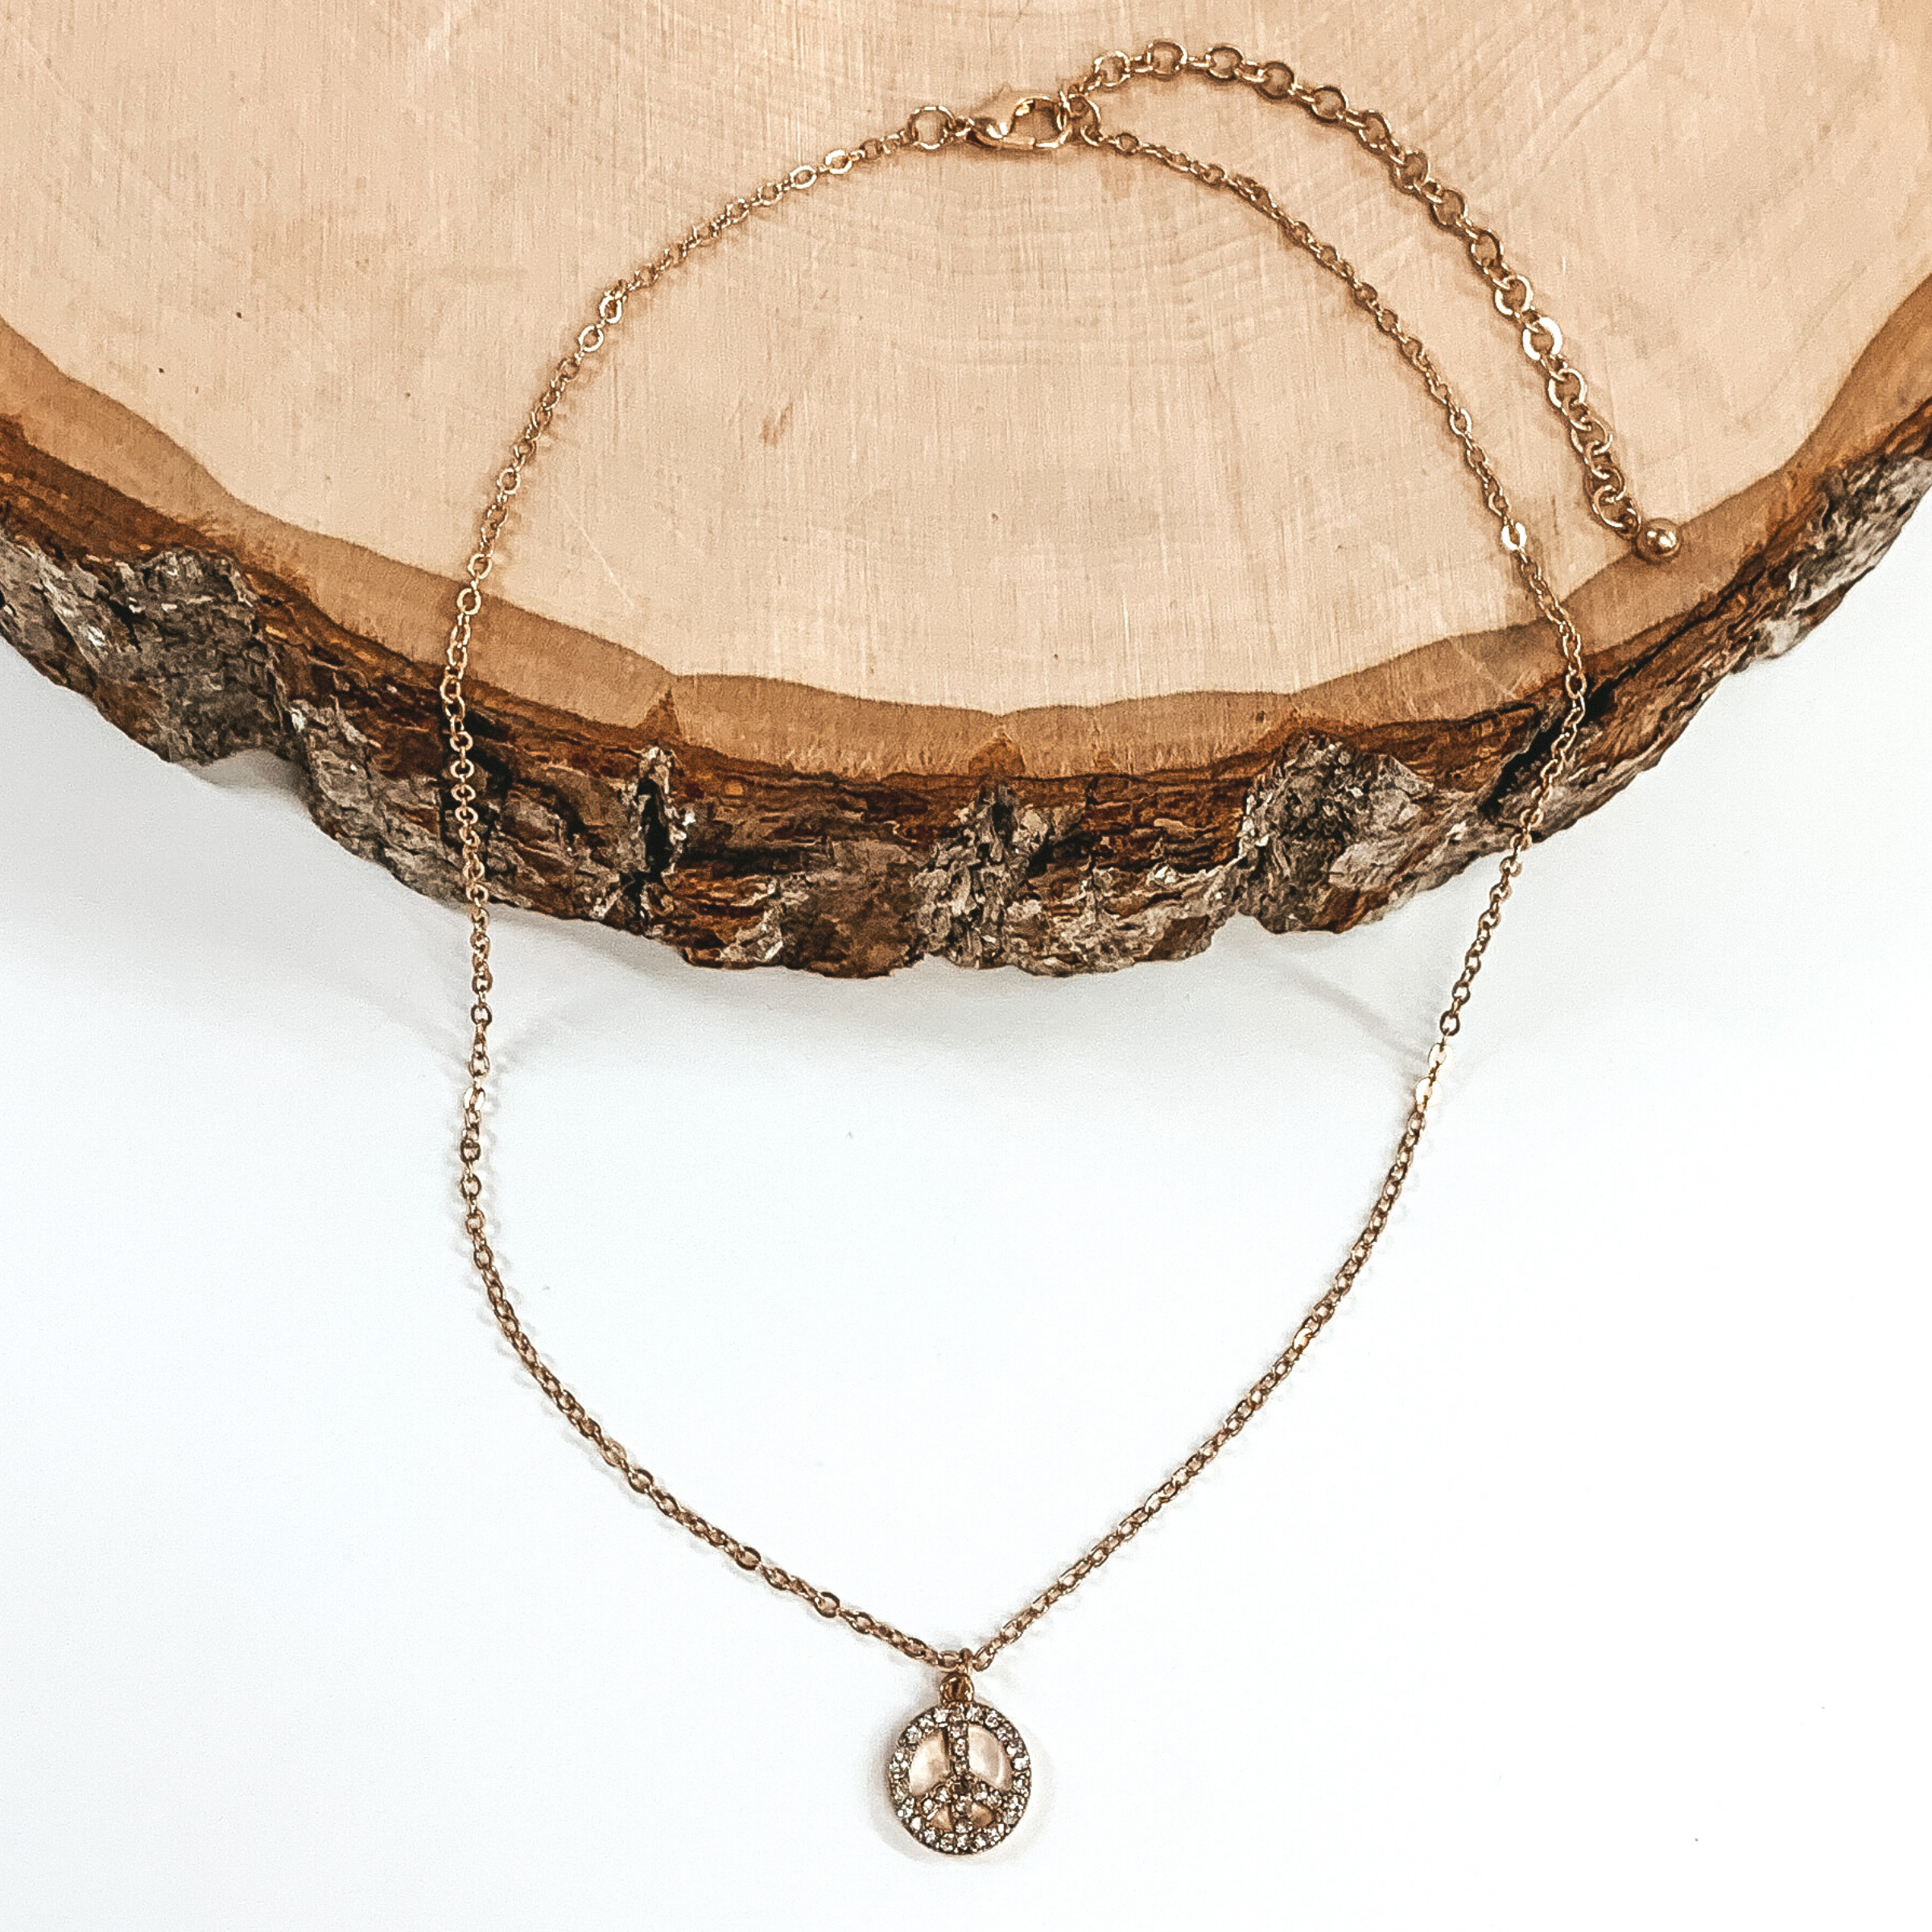 This is a gold thin chained necklace with a small gold, peace sign pendant that has clear crystals. This necklace is pictured half laying on a piece of wood and on a white background.